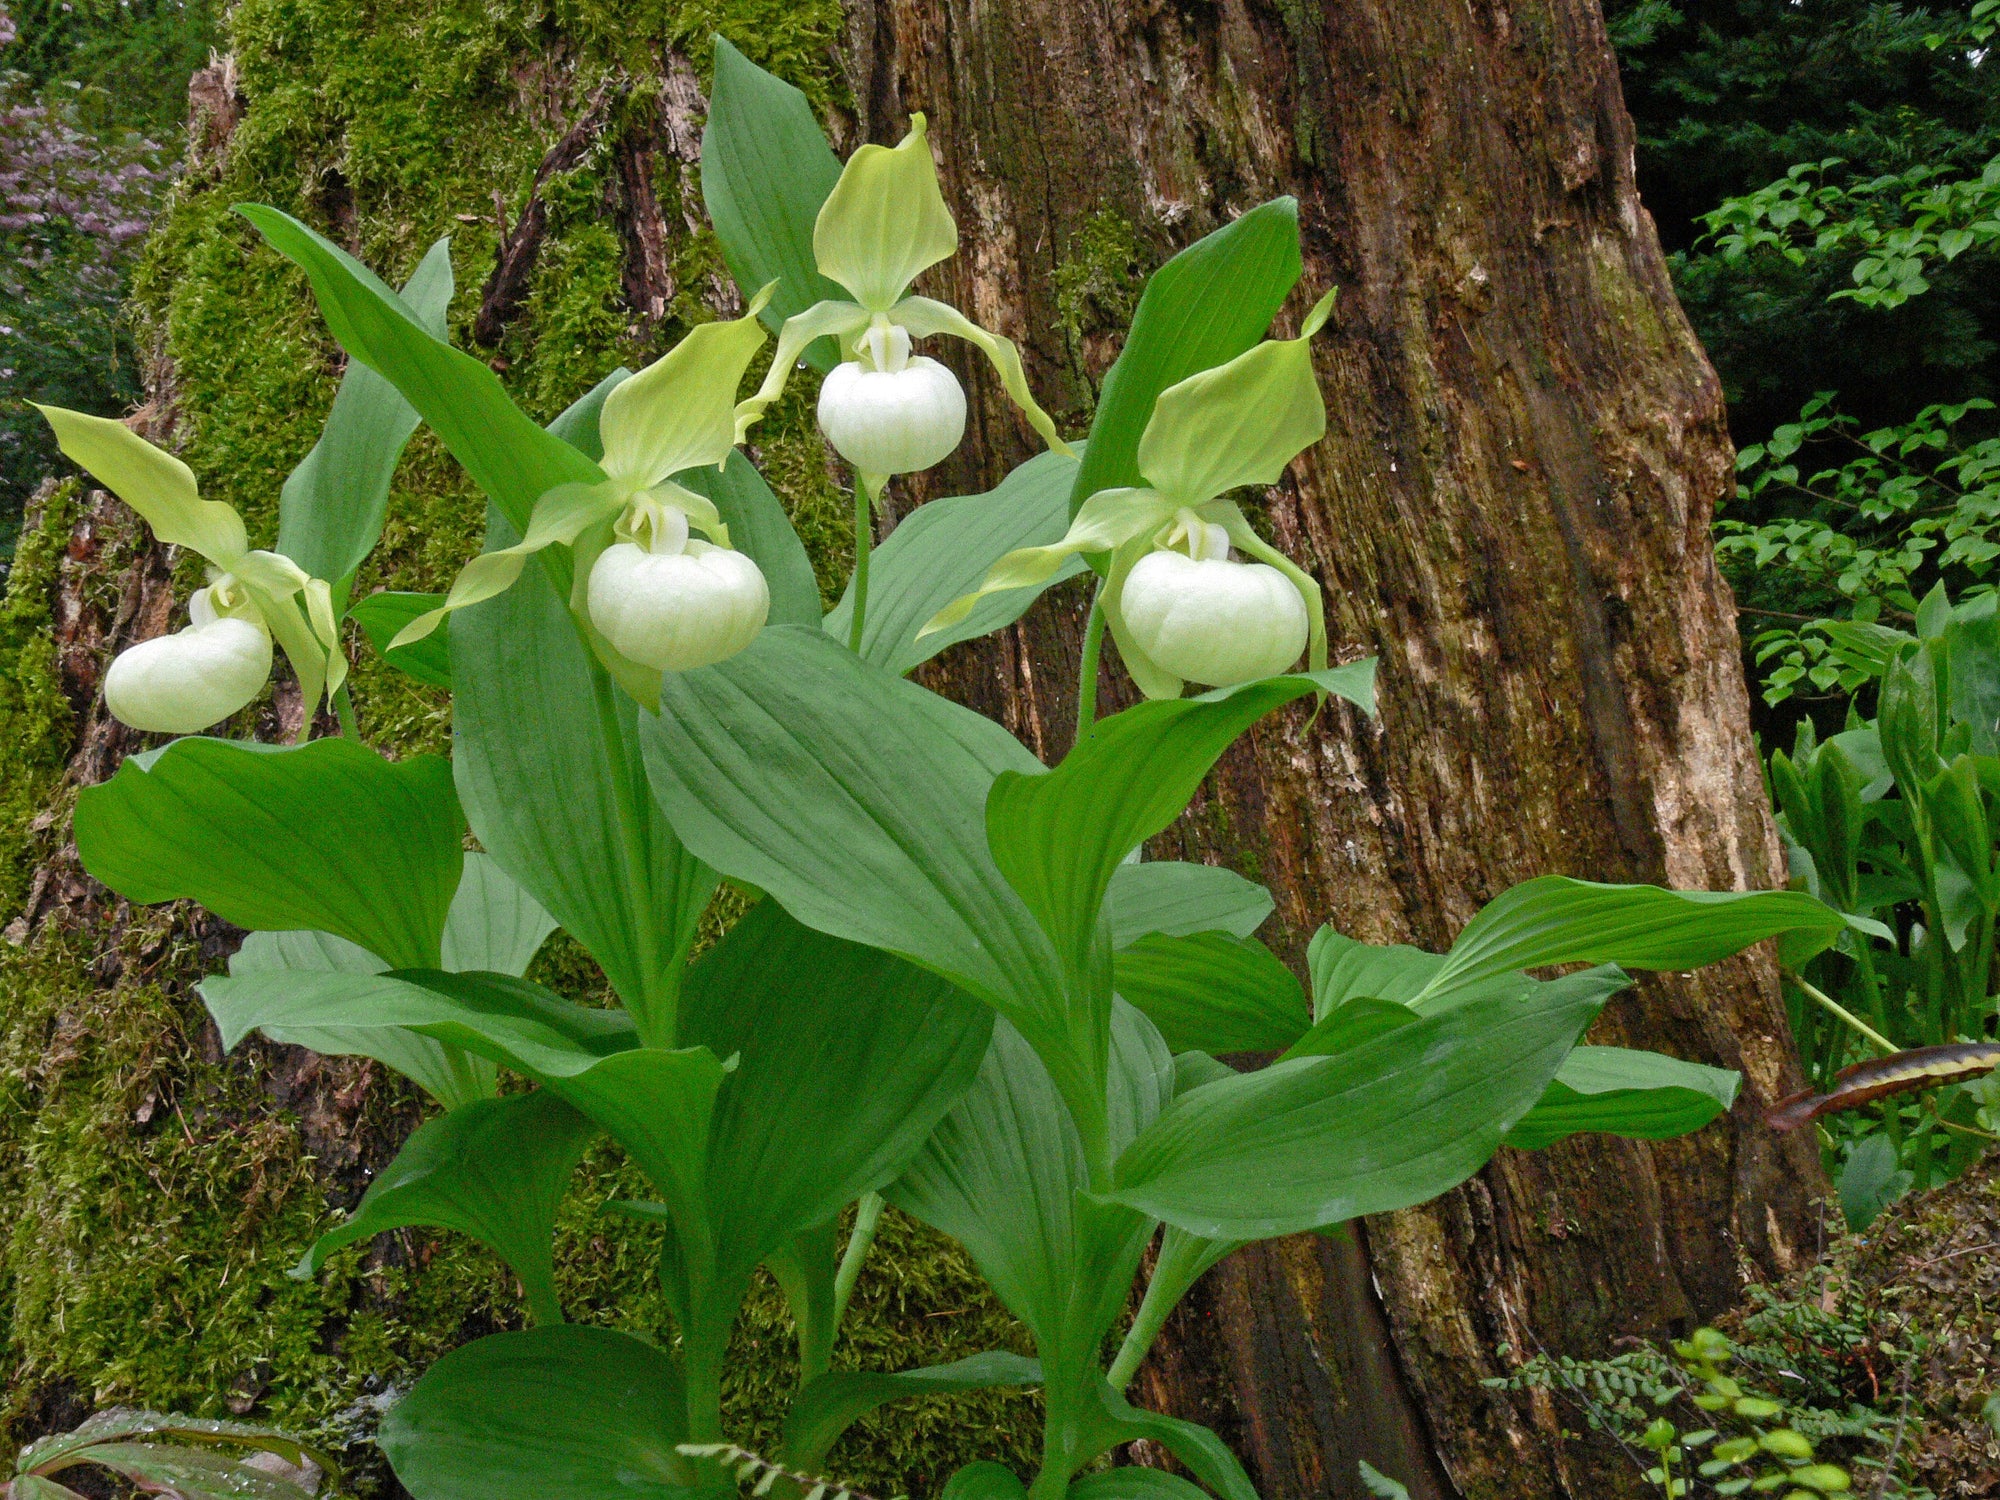 Cypripedium 'Frosch's Queen of the Mist'  (Lady's Slipper Orchid)